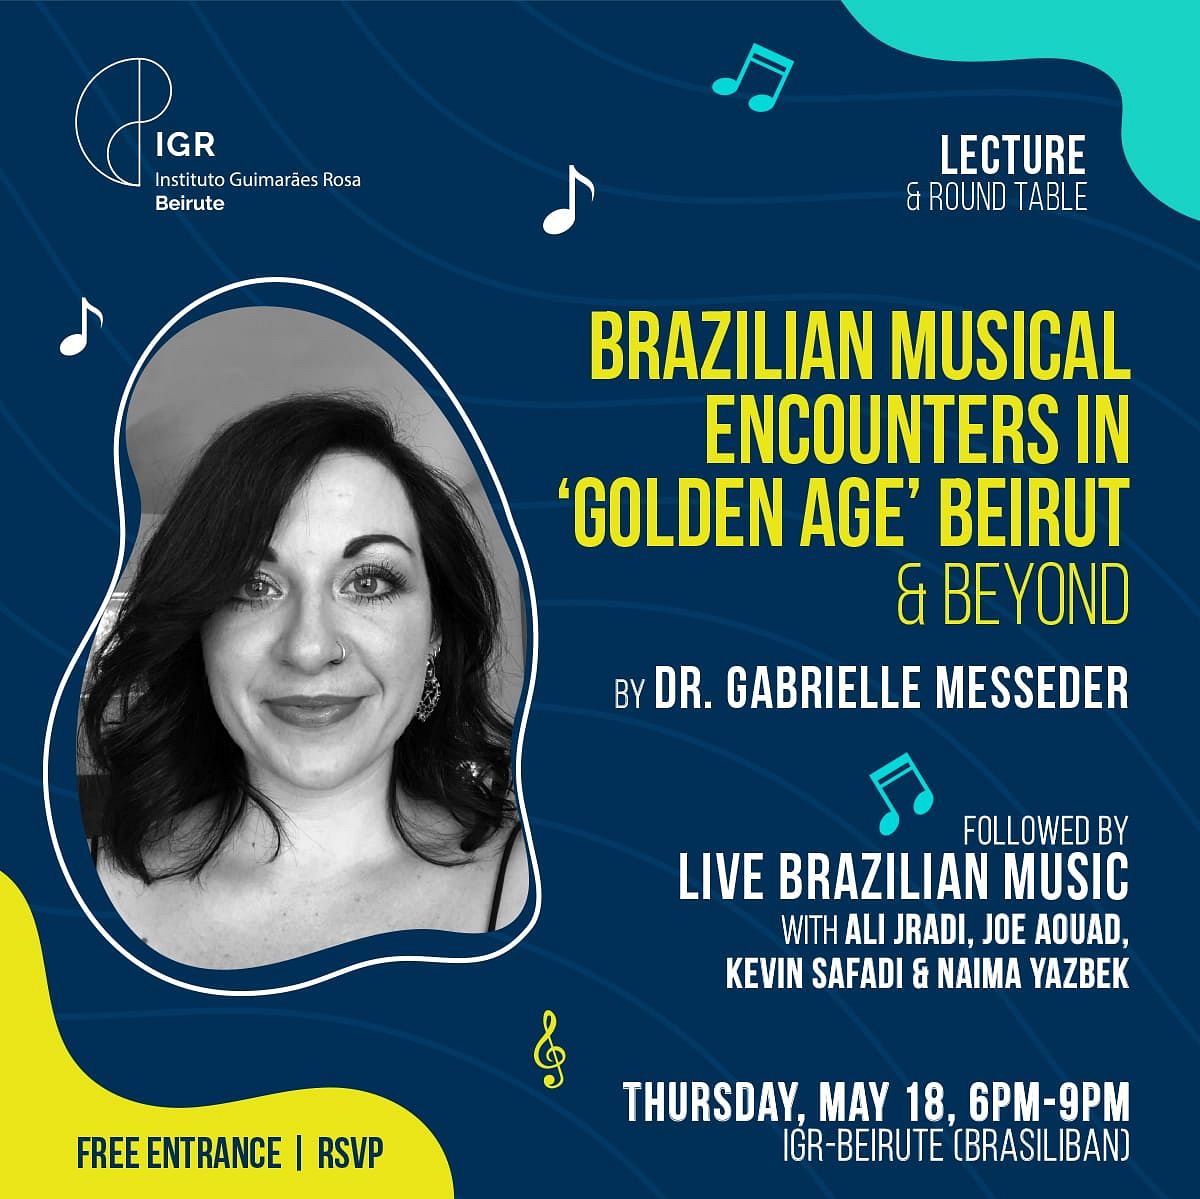 BRAZILIAN MUSICAL ENCOUNTERS IN GOLDEN AGE BEIRUT AND BEYOND thumbnail